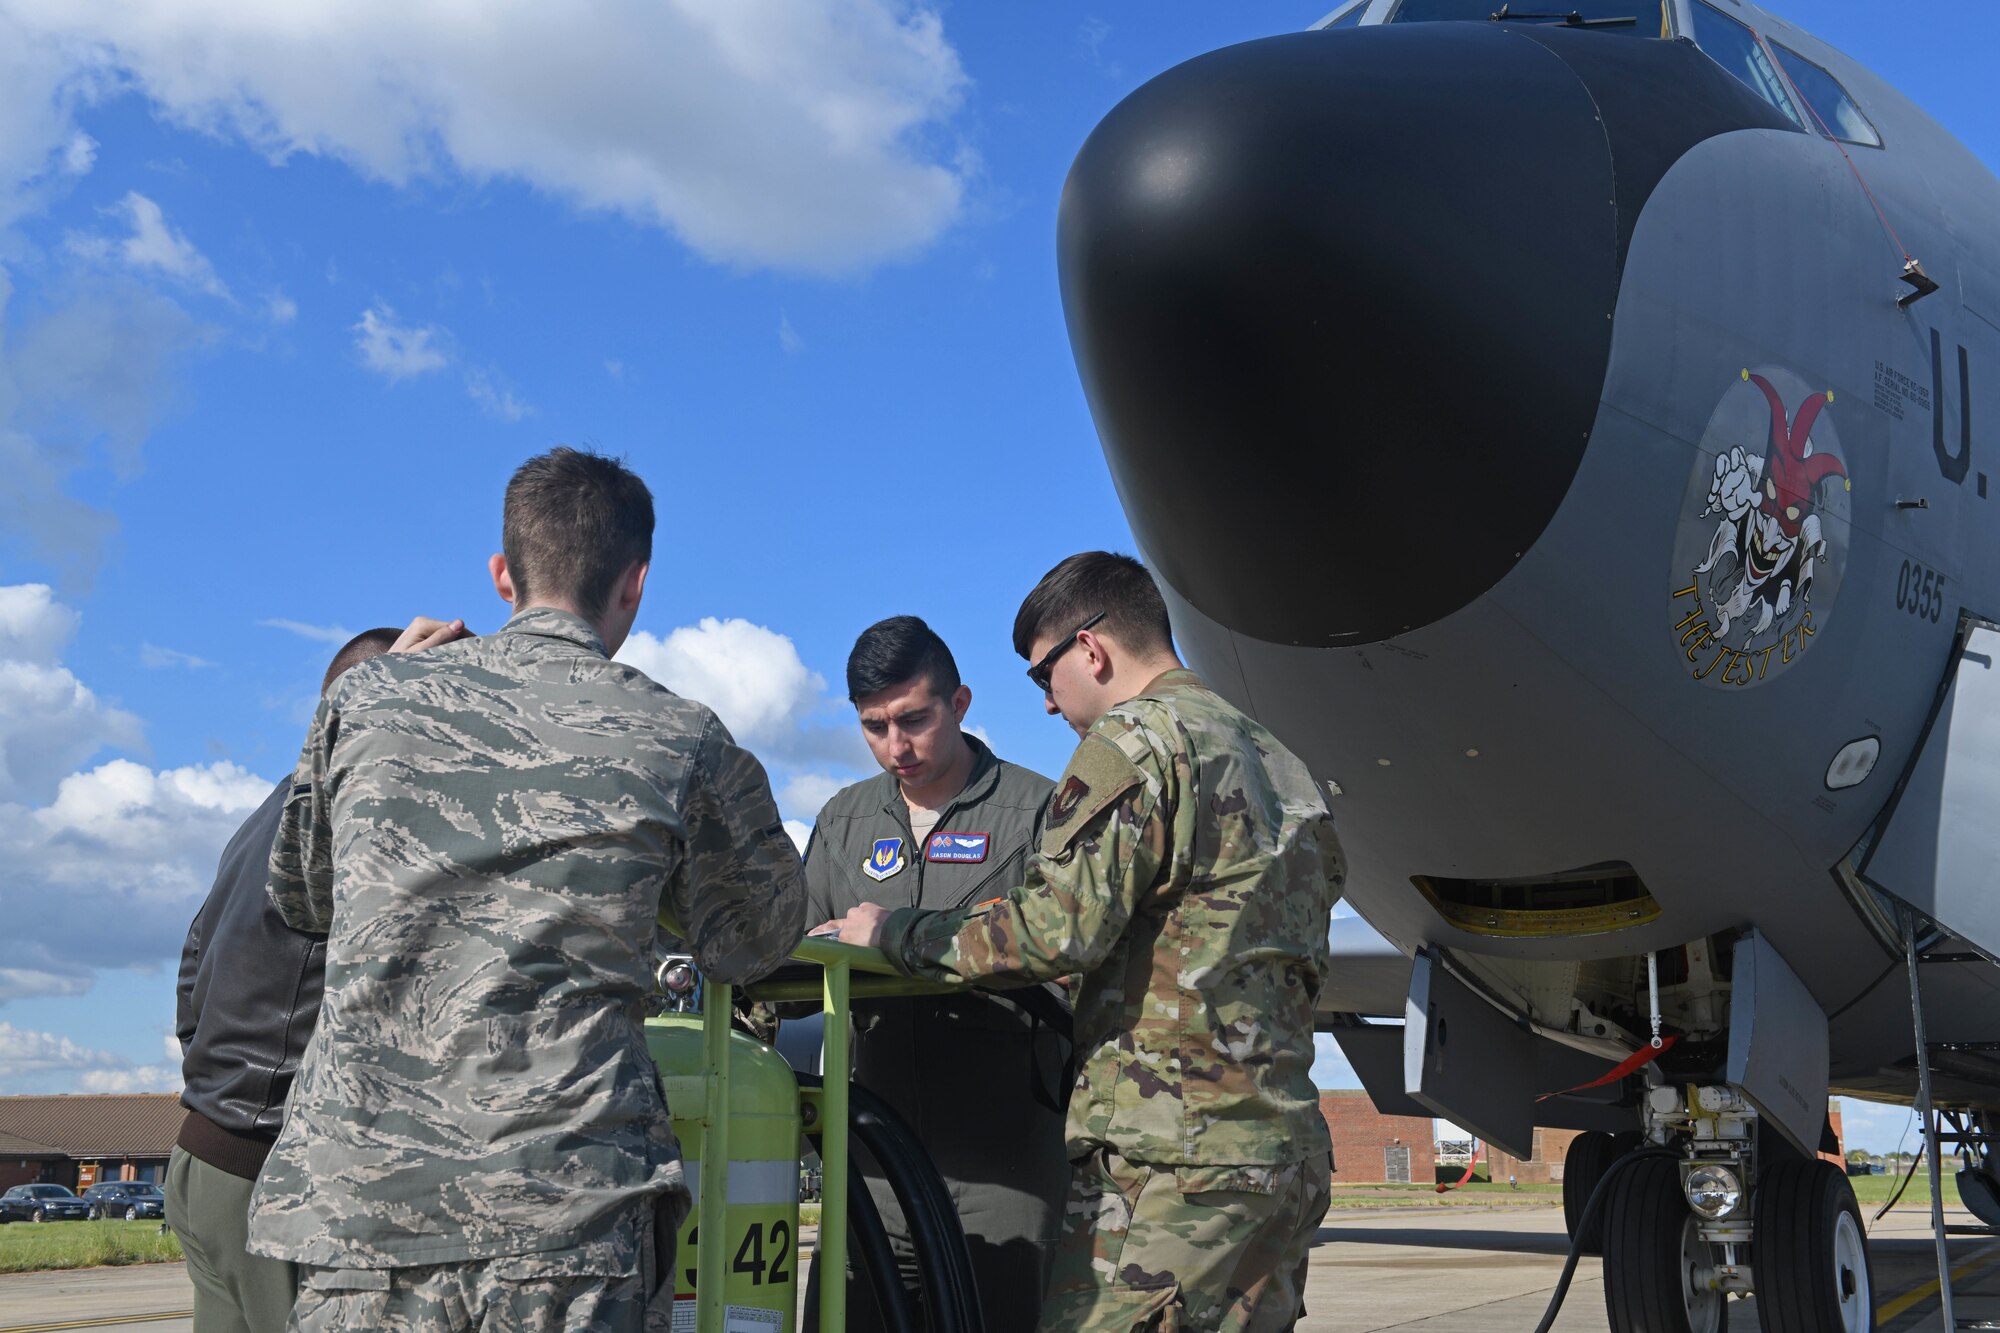 Airmen from the 100th Air Refueling Wing and 351st Air Refueling Squadron discuss flight plans prior to takeoff during the “FURIOUS 48” readiness exercise at RAF Mildenhall, England, April 24, 2019. The exercise was designed to emphasize the importance of combat skills effectiveness training and test 100th ARW and 48th Fighter Wing Airmen on their ability to survive and operate in wartime conditions. (U.S. Air Force photo by Senior Airman Luke Milano)